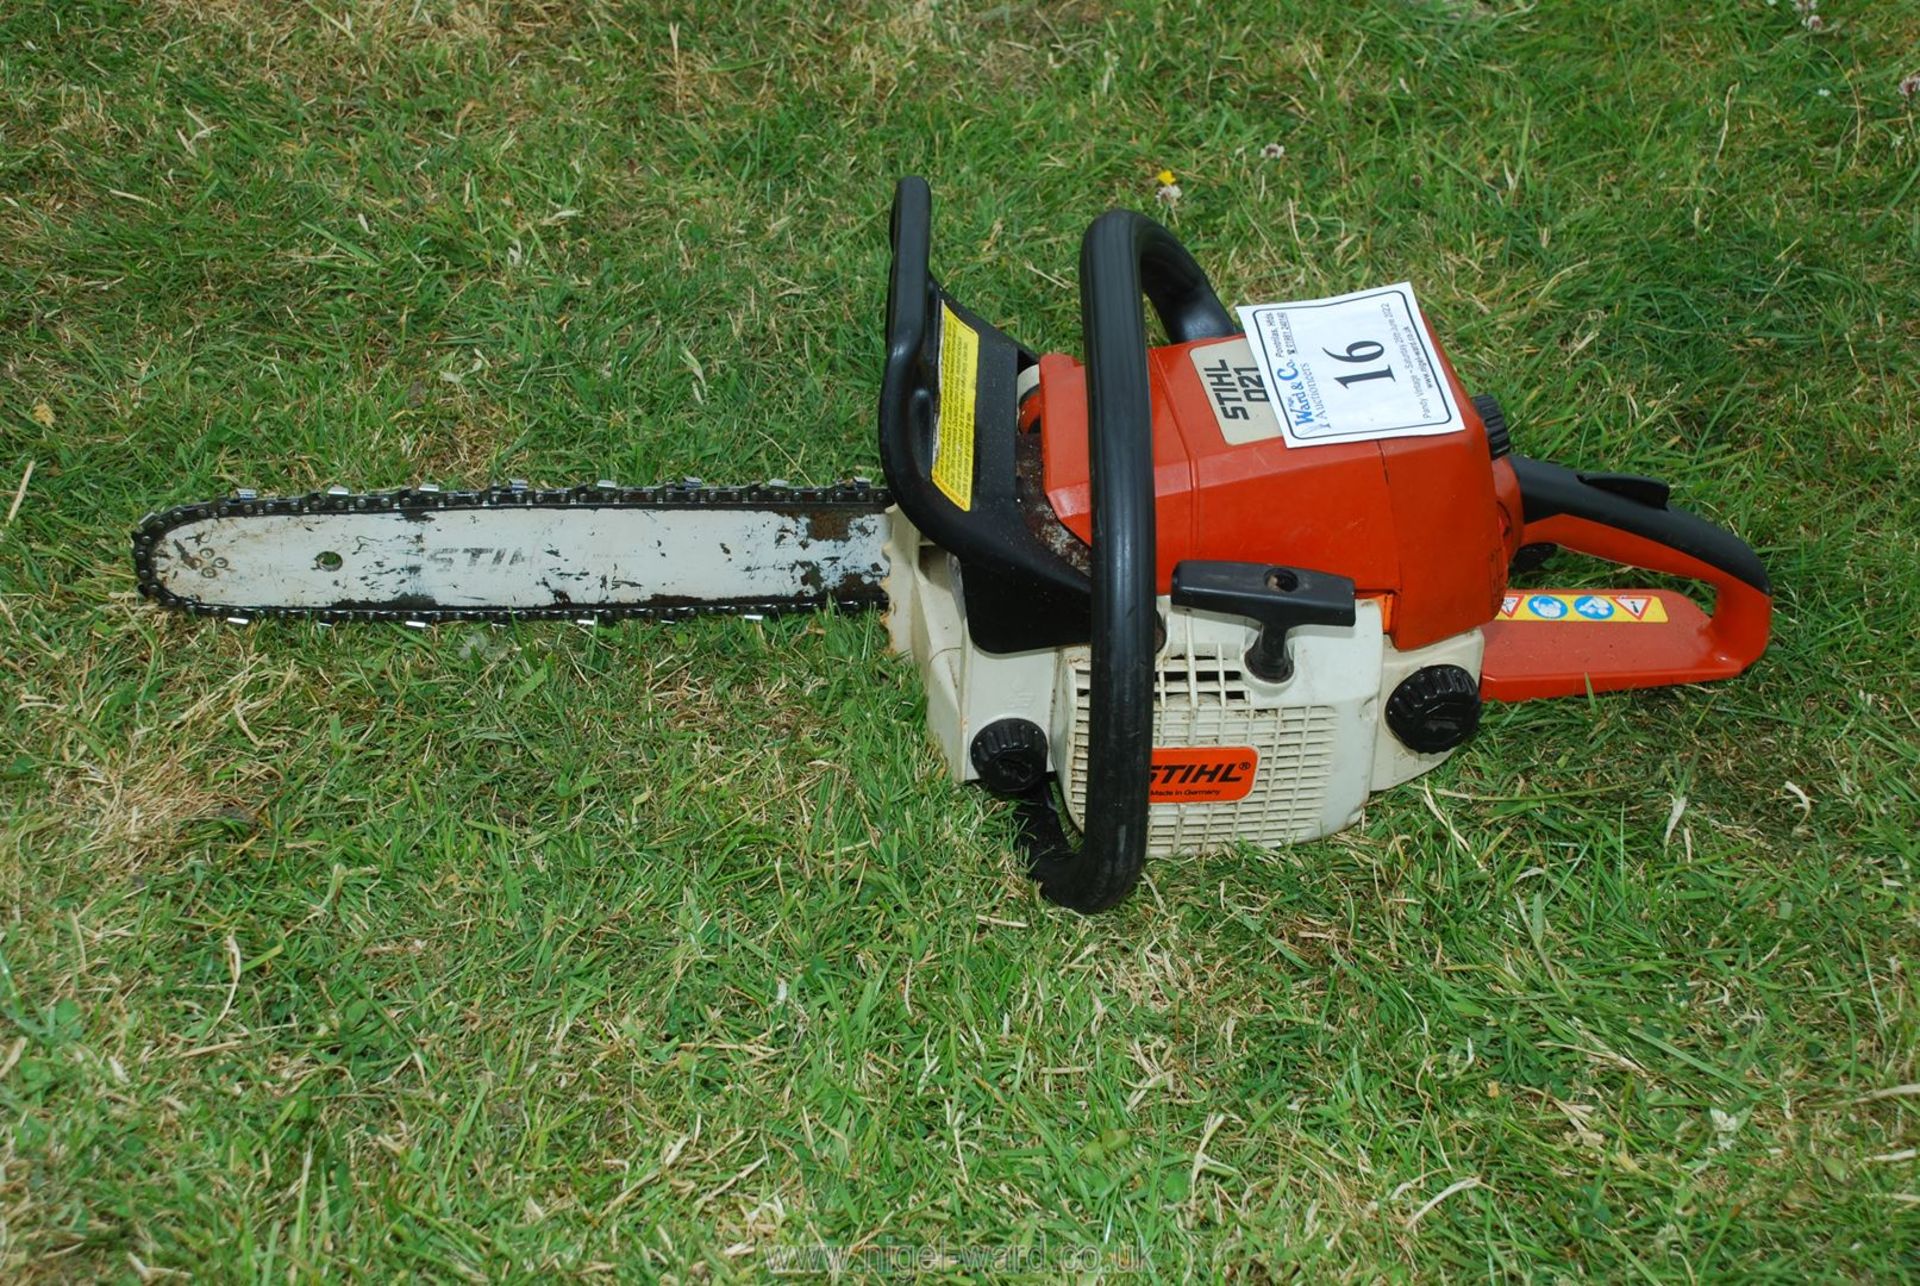 A Stihl 021 chainsaw with chain-brake, good compression. Ran at time of lotting.